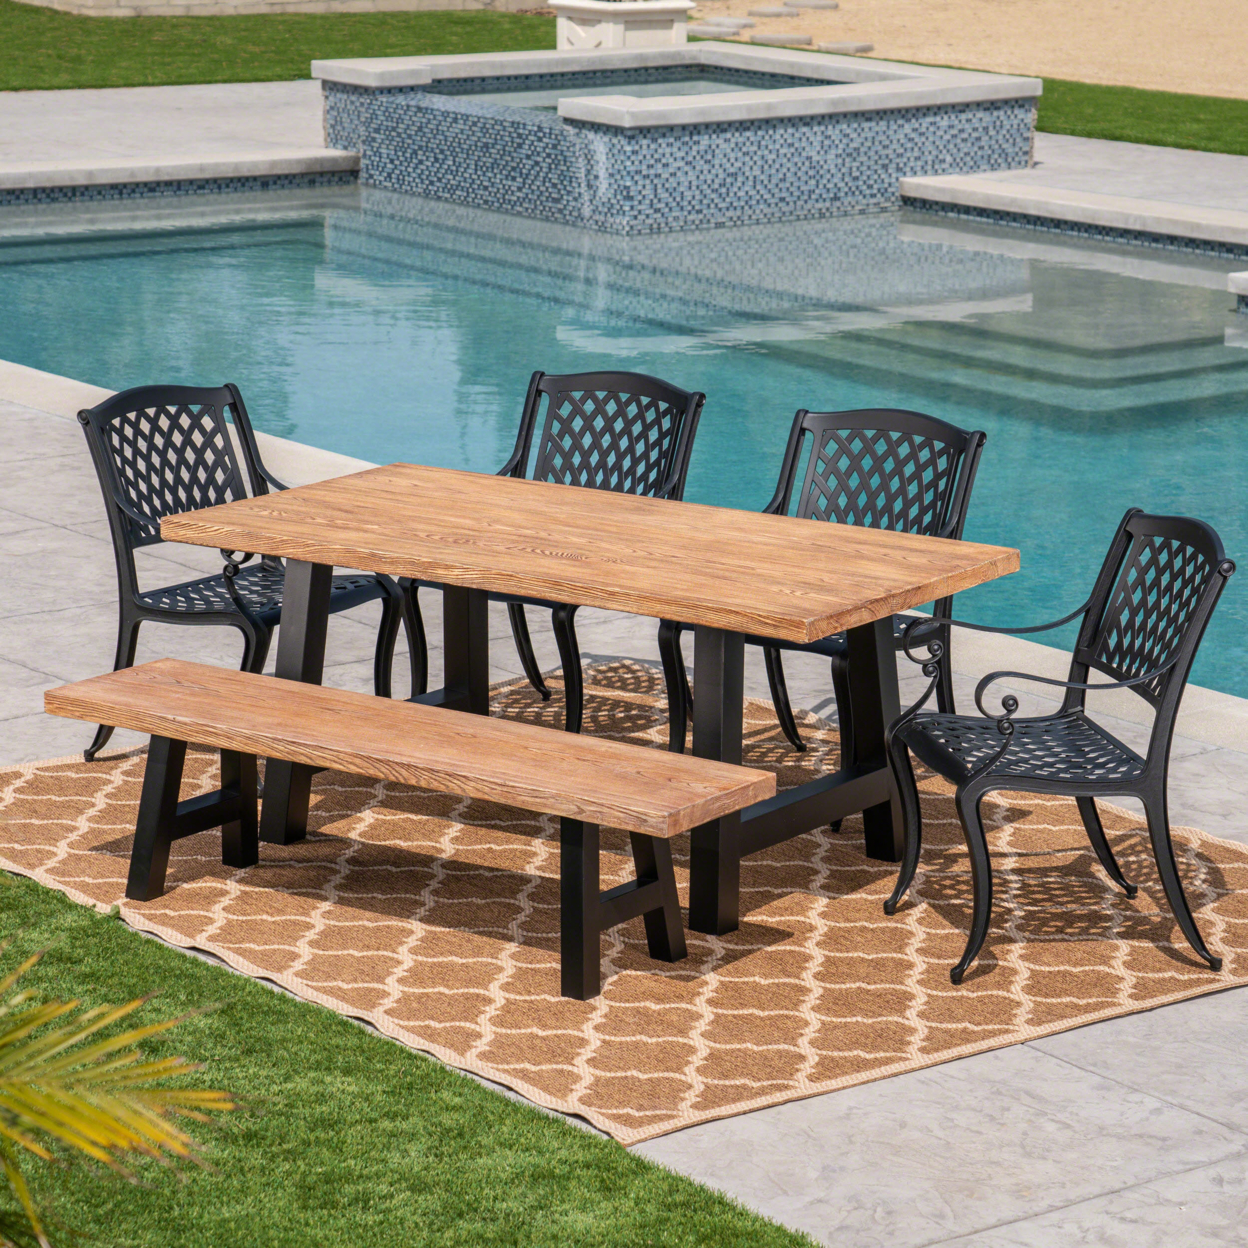 Chris Outdoor 6 Piece Black Sand Aluminum Dining Set With Light Weight Concrete Table And Bench - Natural Grey